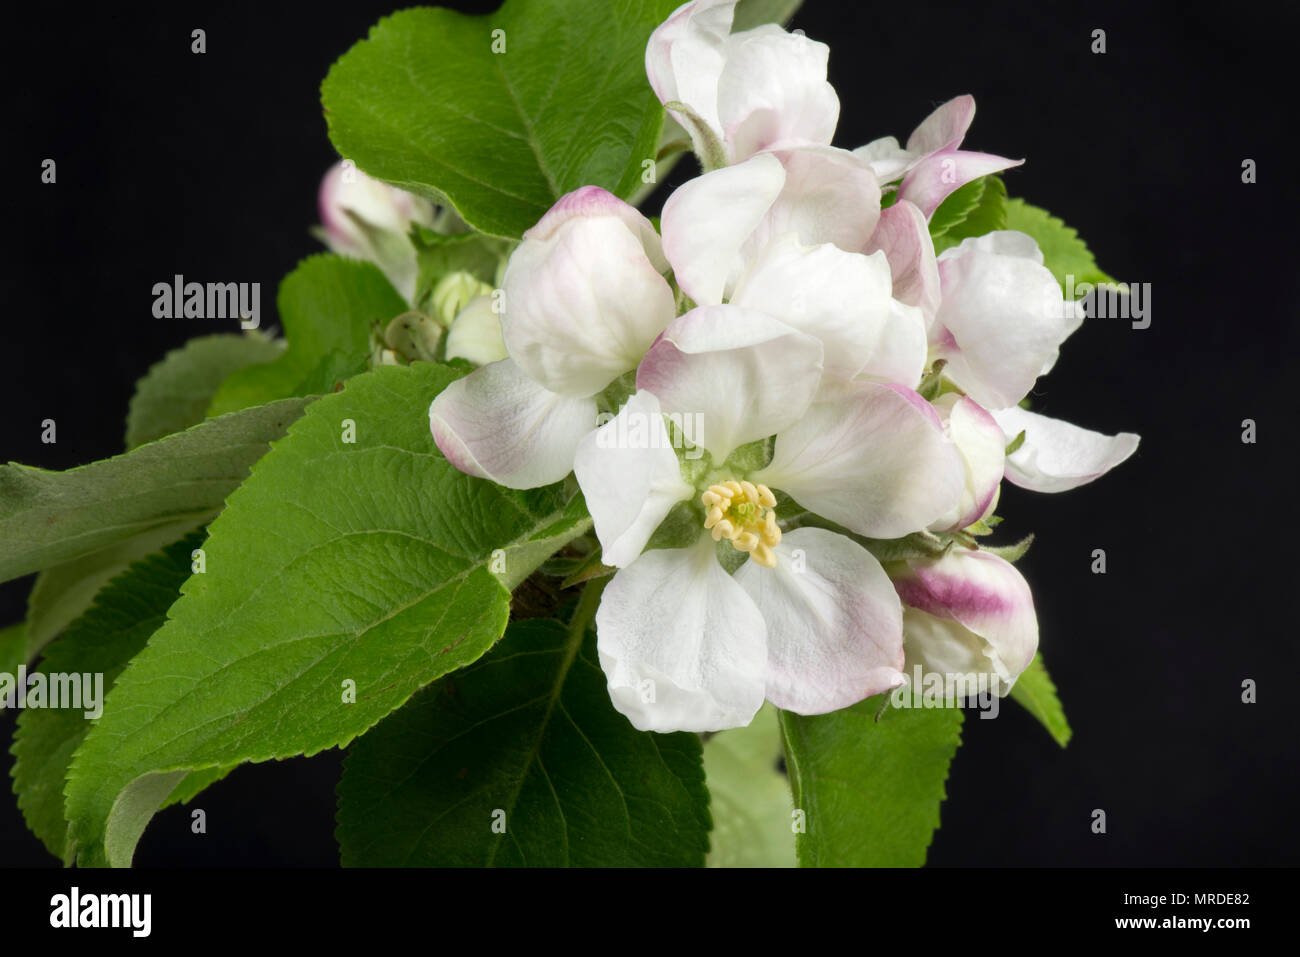 King flower on apple buds and blossom among a rosette of green leaves in spring Stock Photo